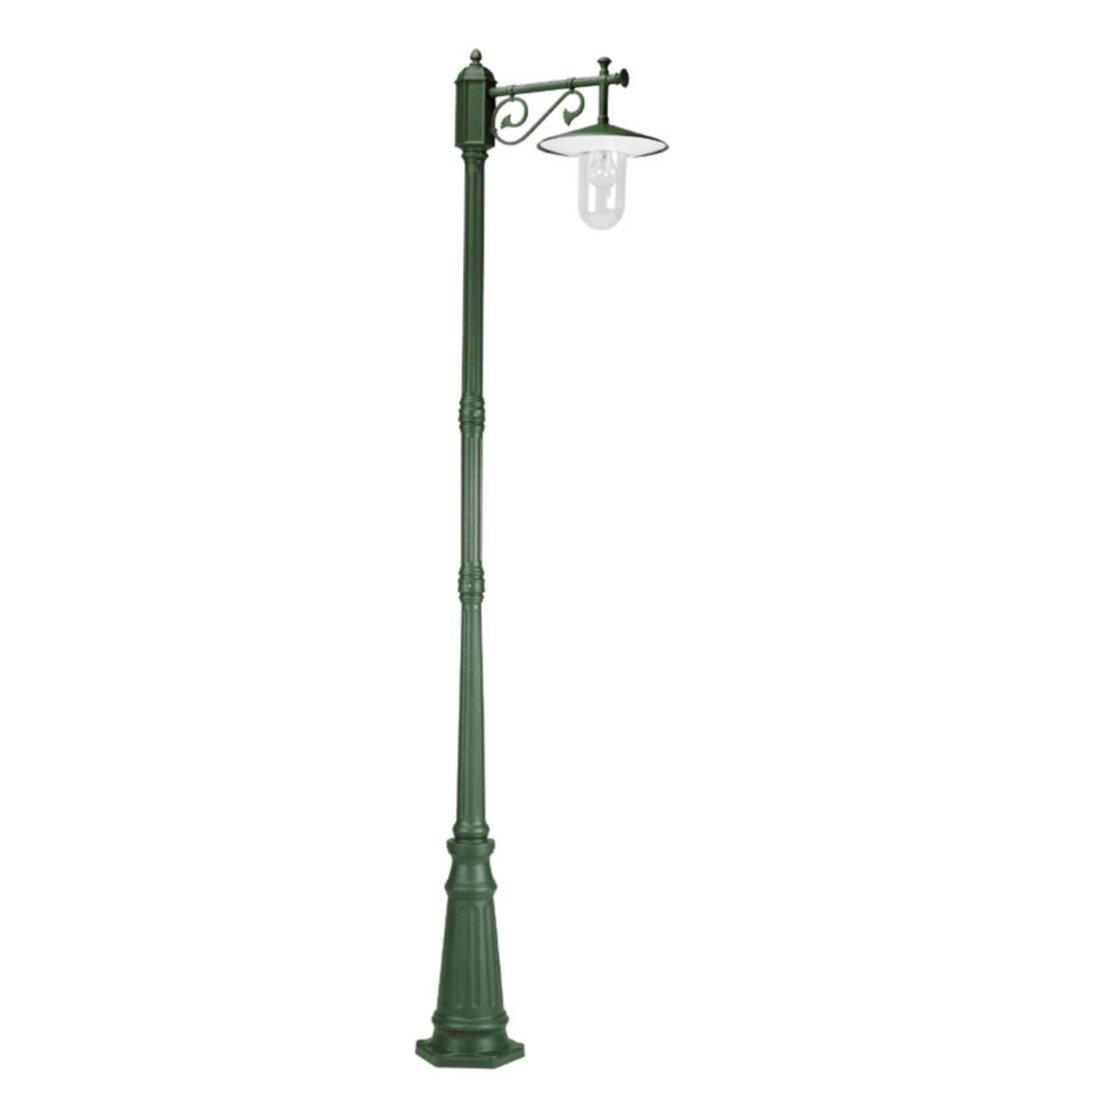 K.S. Verlichting Louvre post light green/clear